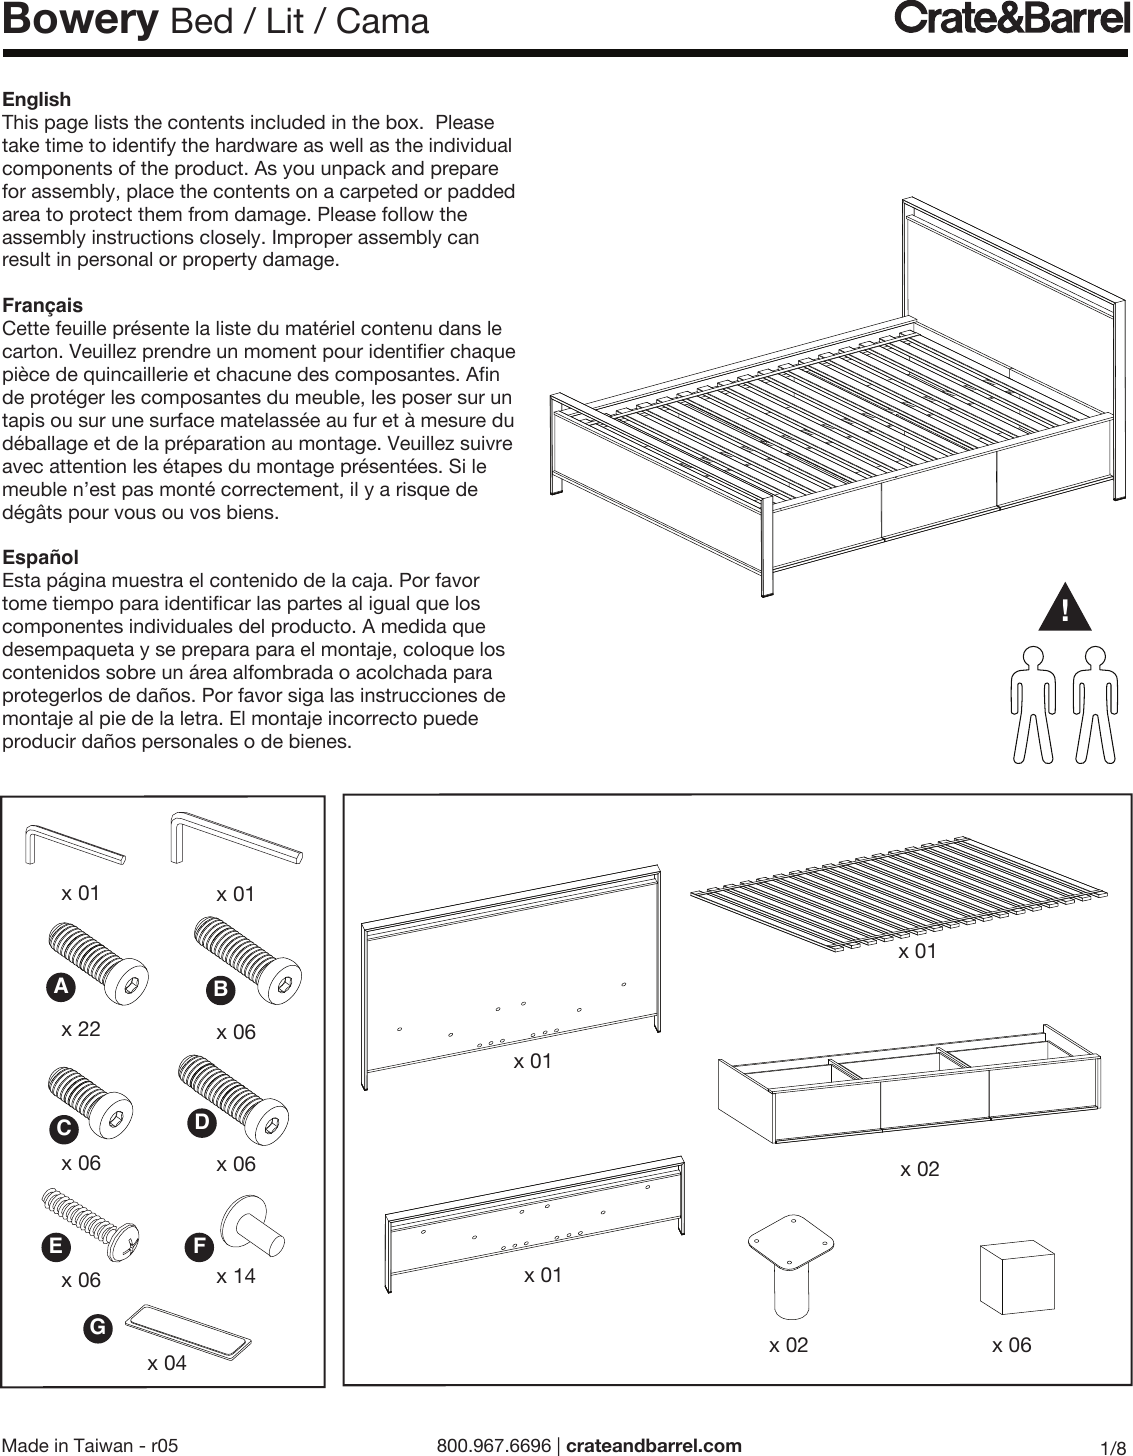 Page 1 of 8 - Crate-Barrel 304-Bowery-Bed-Ml Bowery Bed ML Assembly Instructions From Crate And Barrel